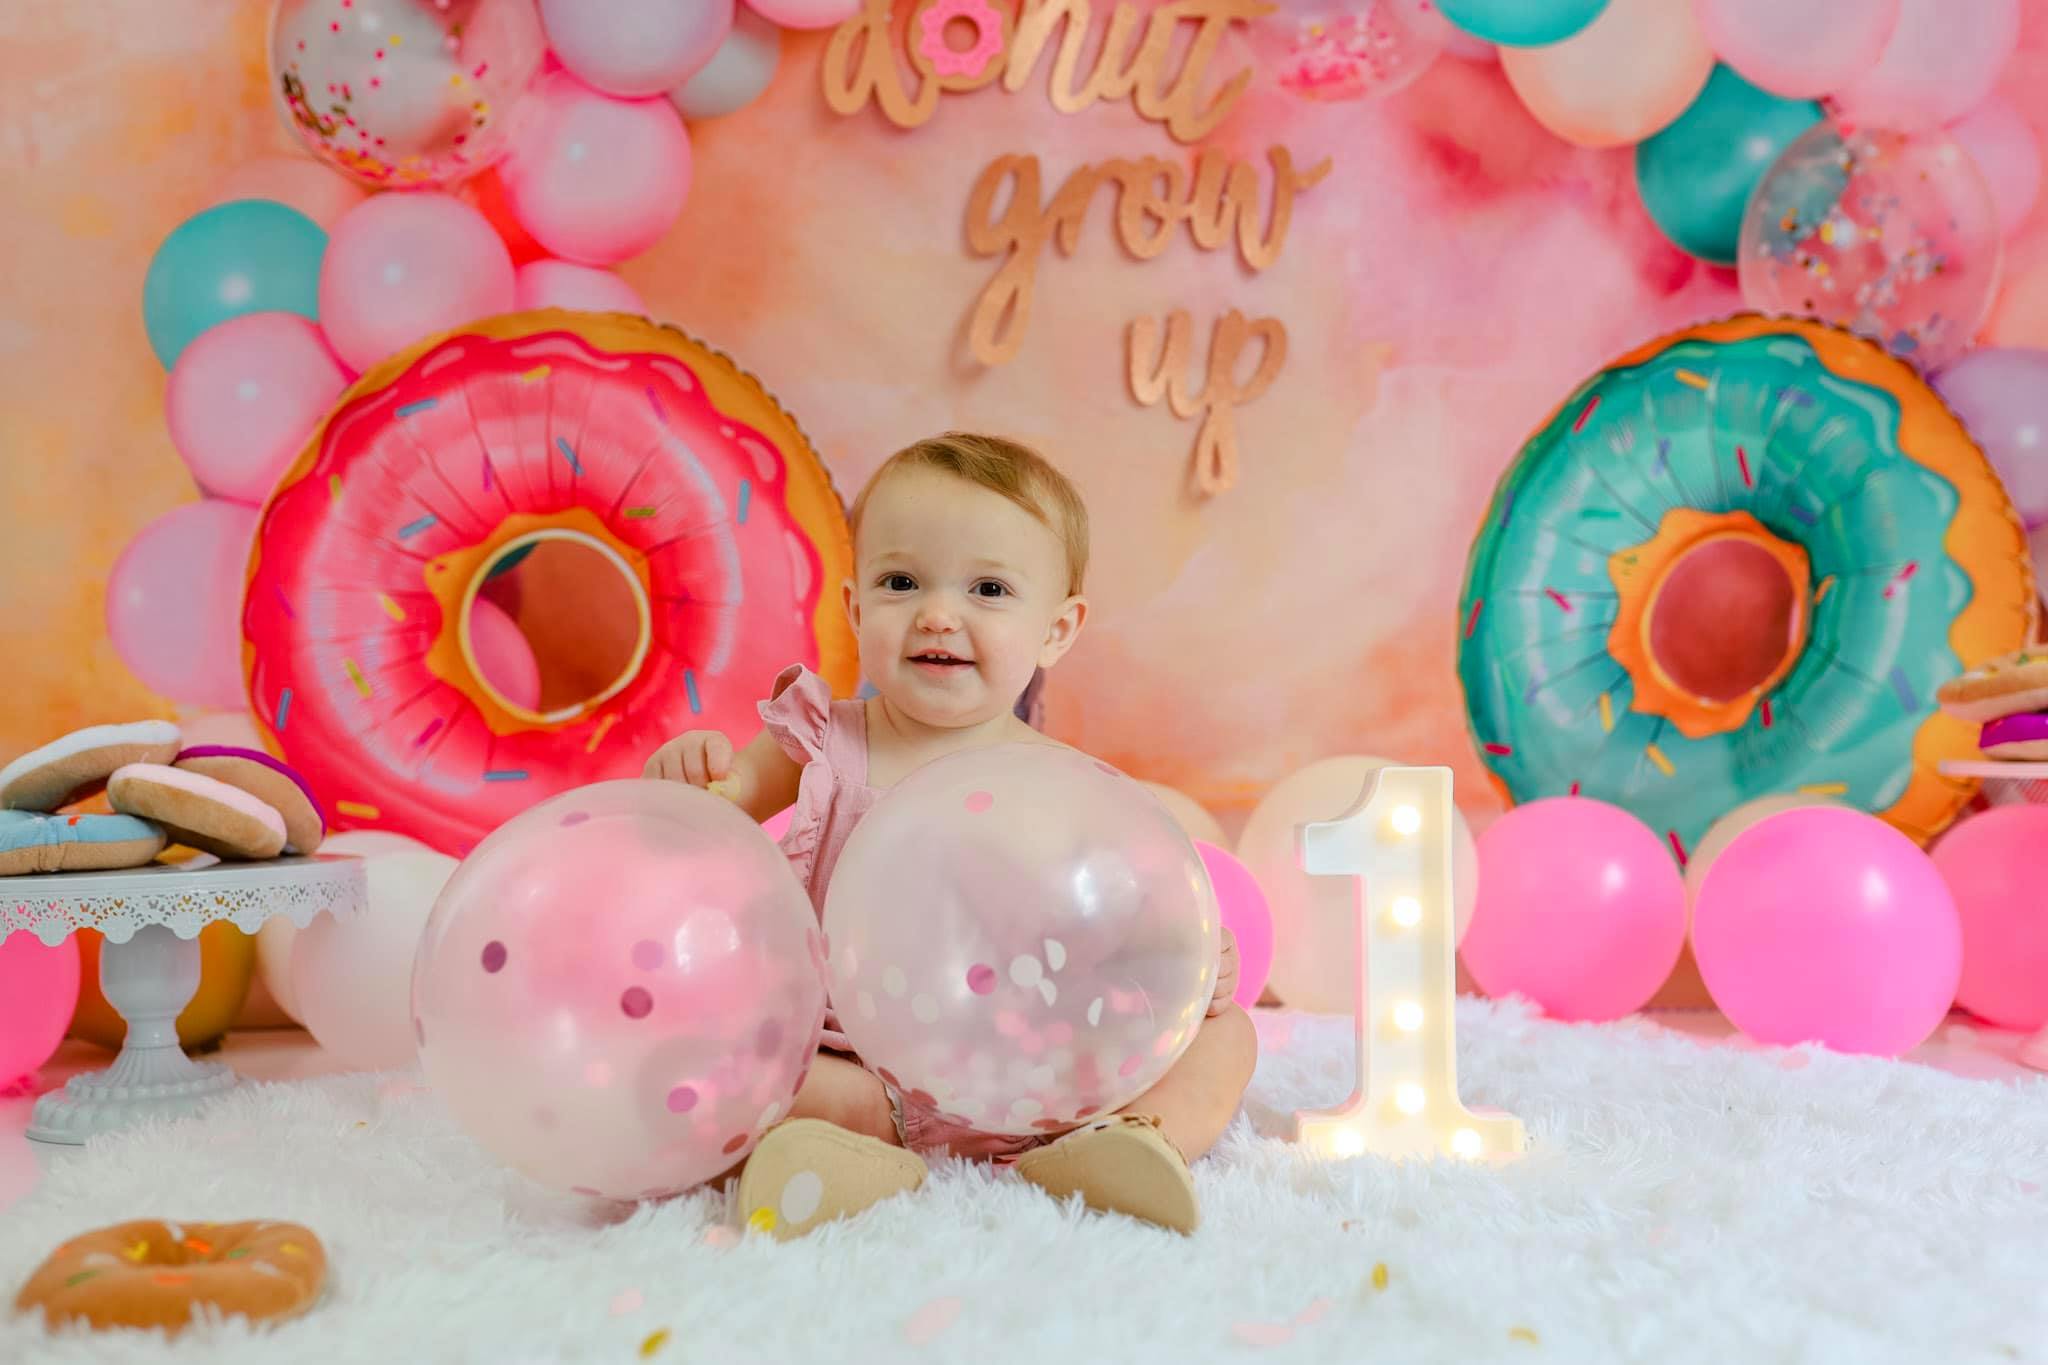 RTS Kate Cake Smash Donut Balloon Backdrop Designed by Emetselch (U.S. only)